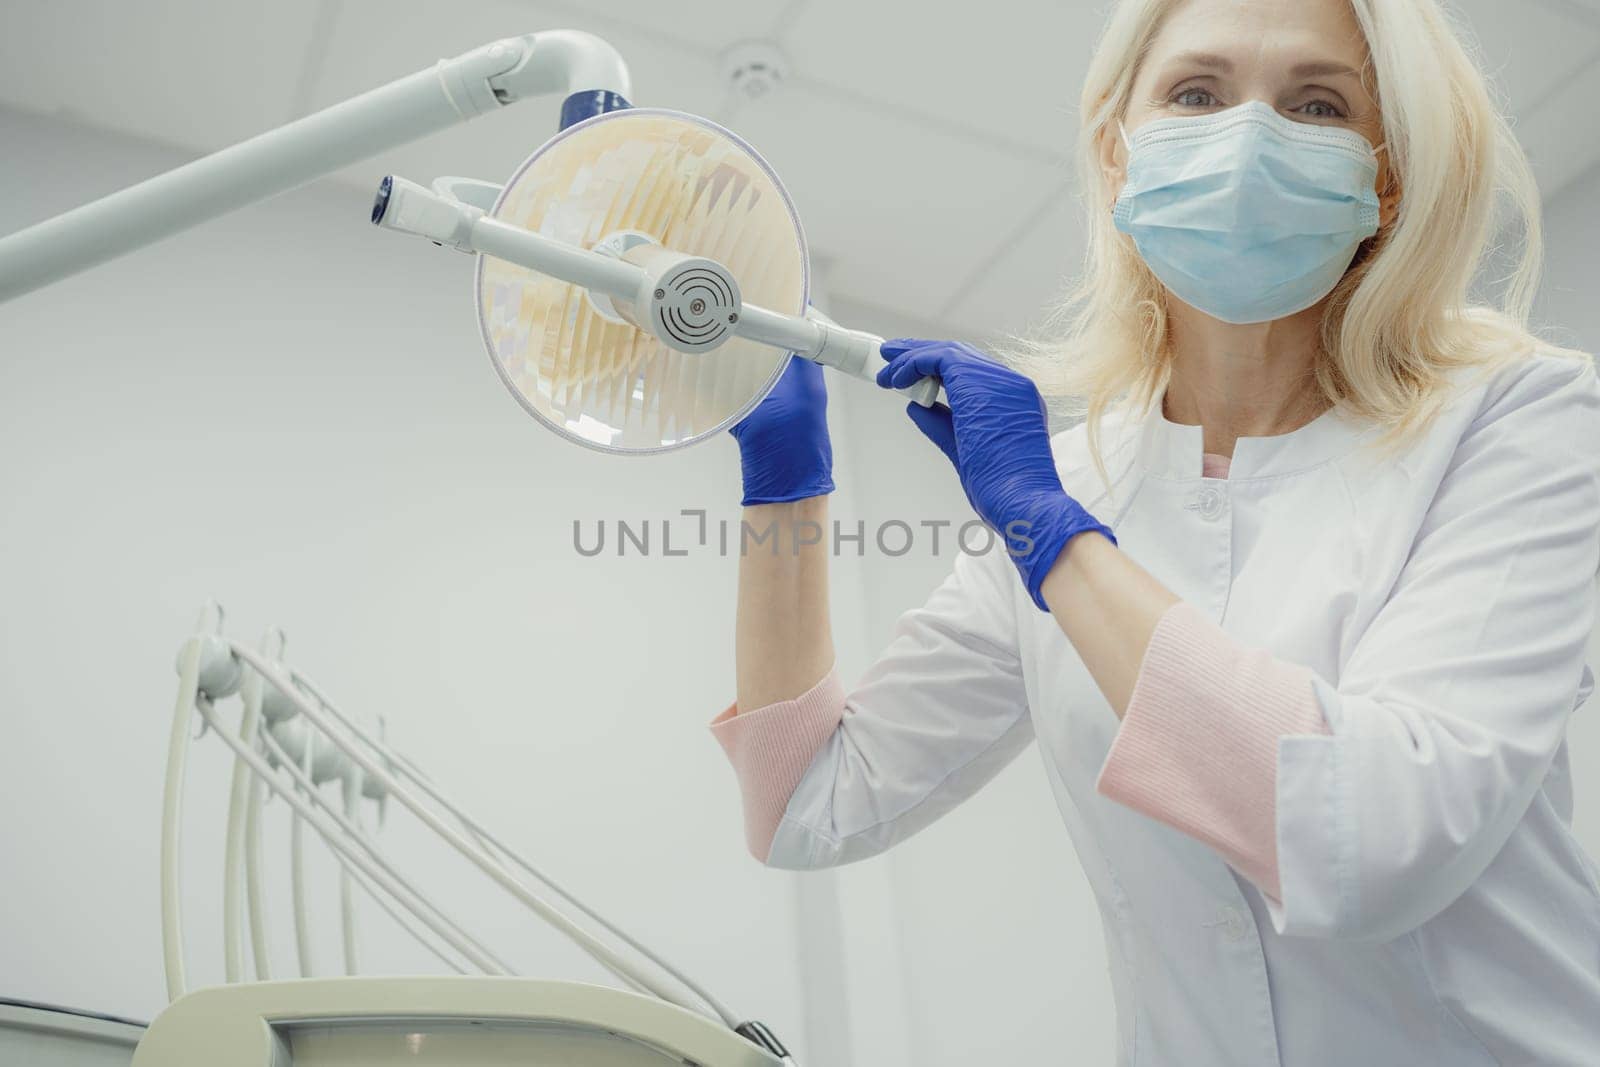 Woman working in dental clinic and doctor in background. High quality photo